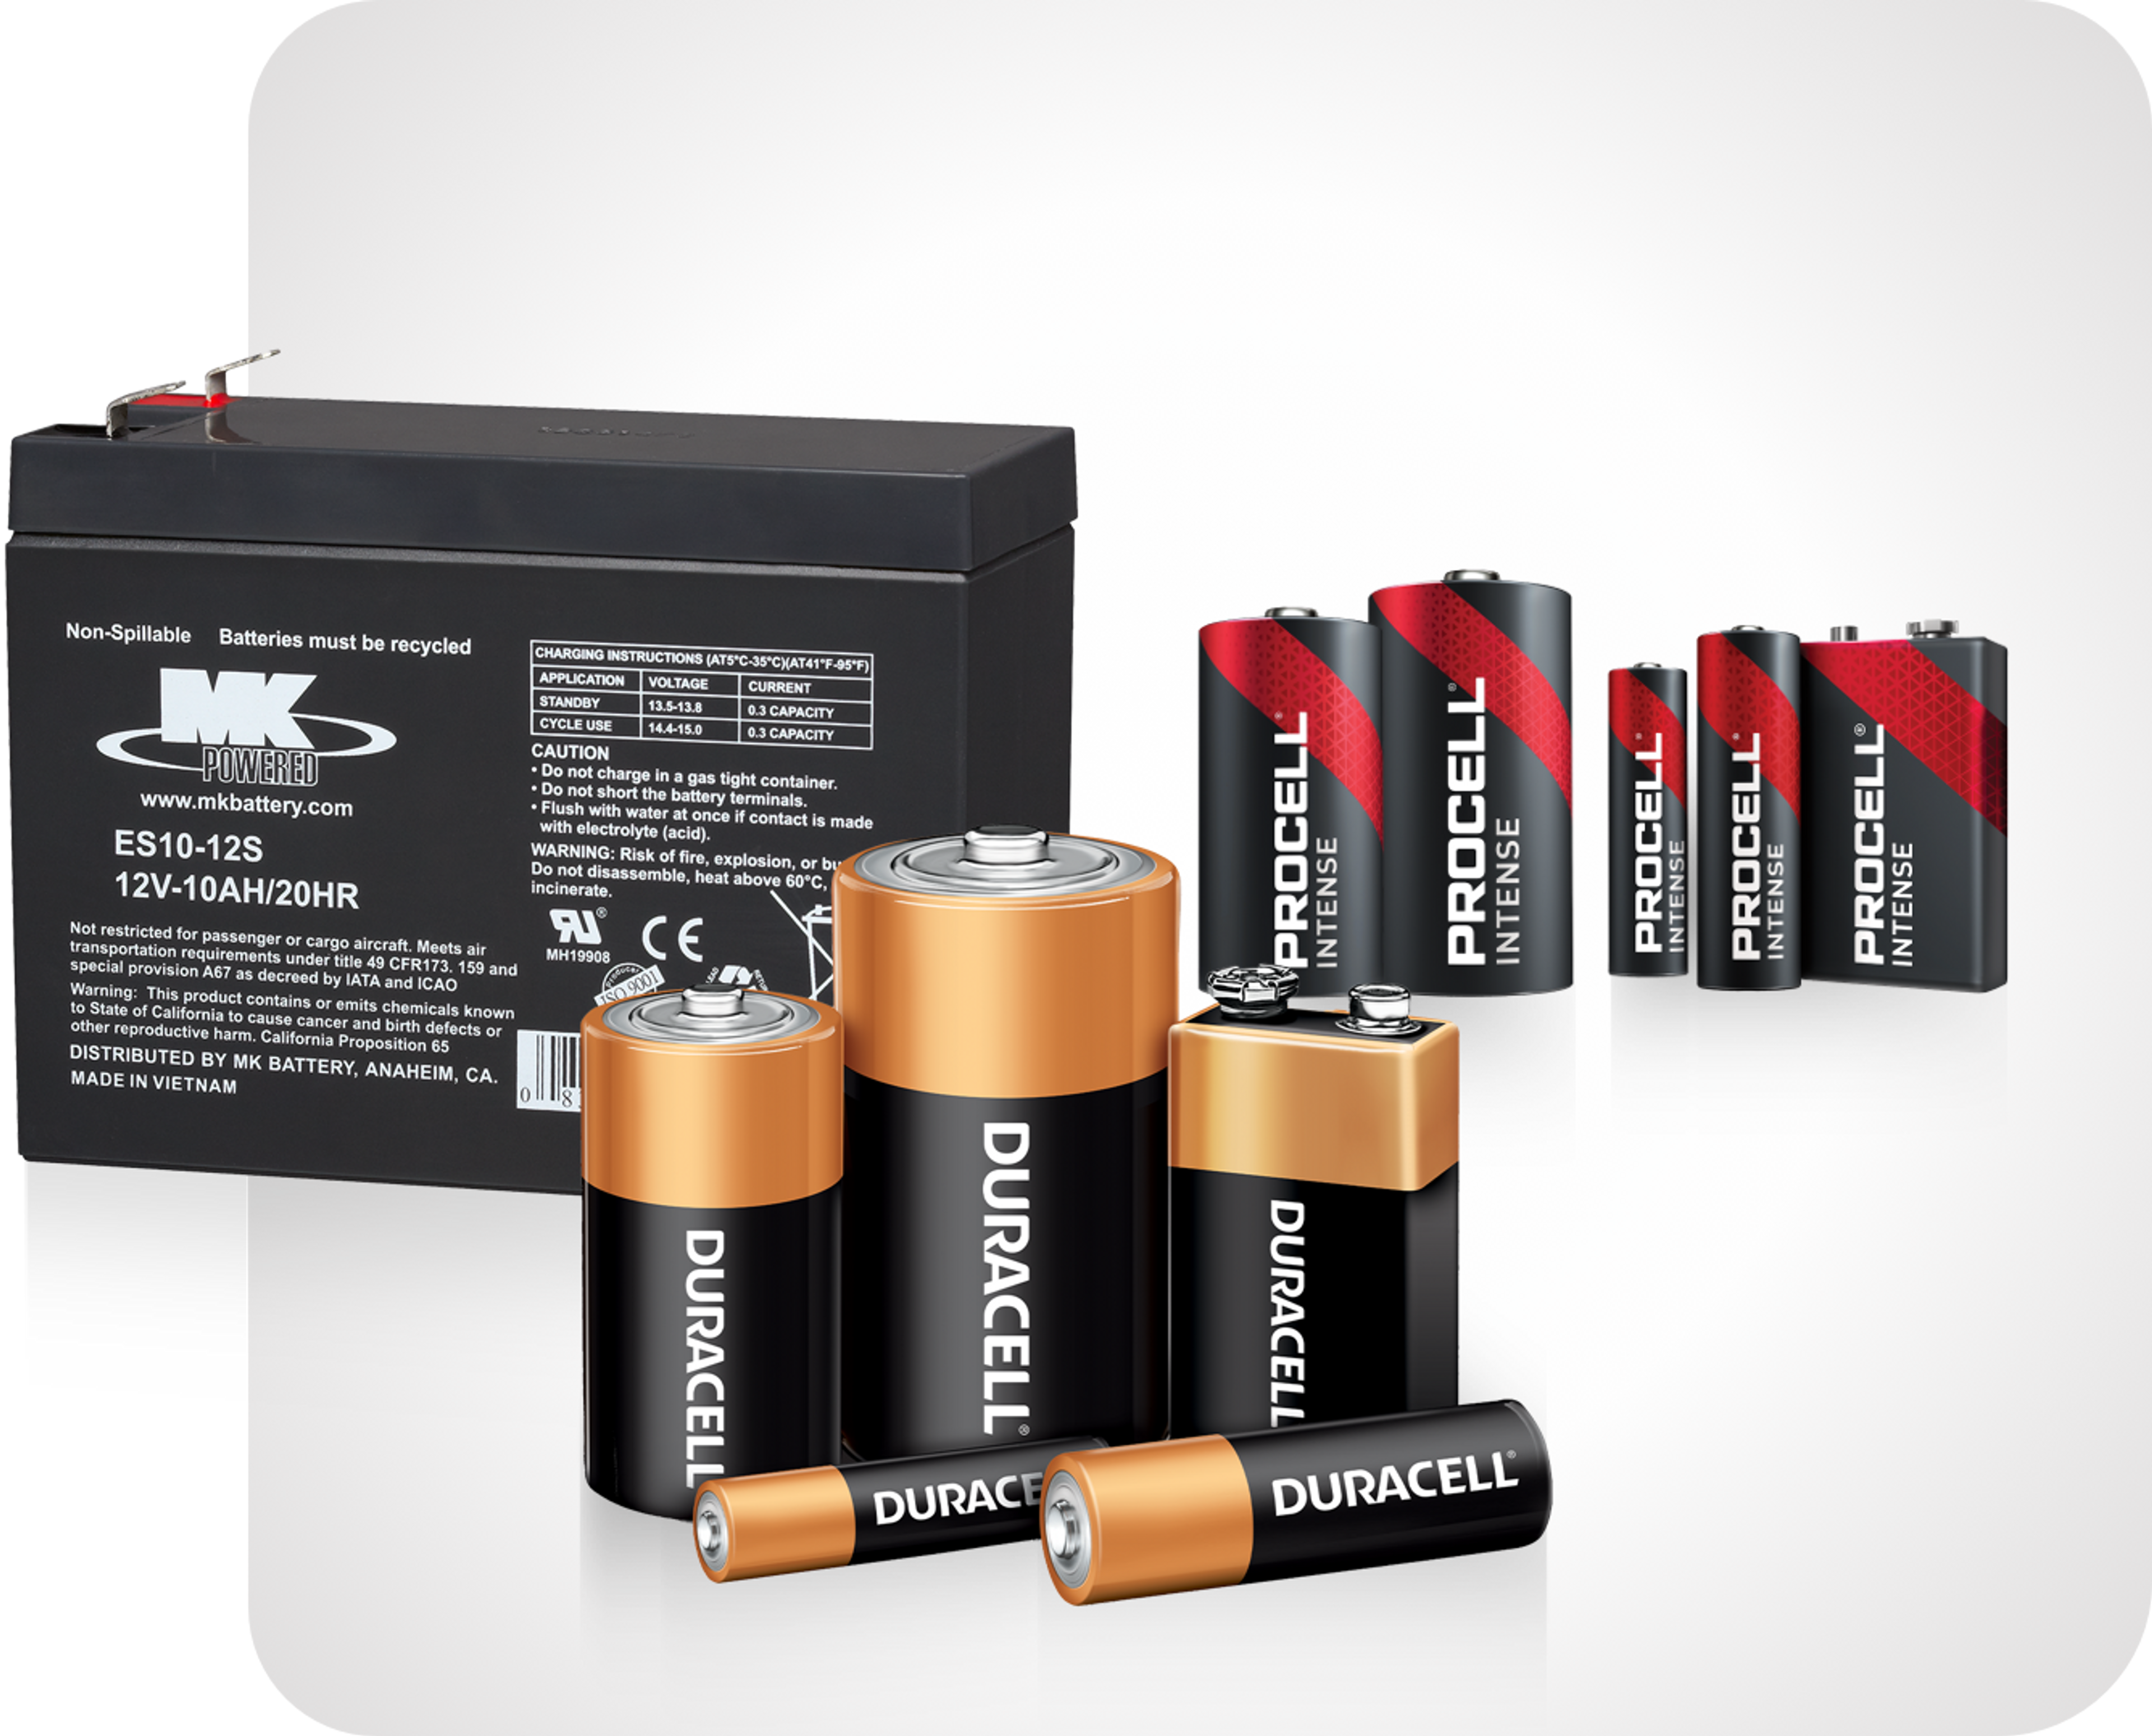 Picture of various batteriesn inclucing duracell, procell and East Penn car battery 